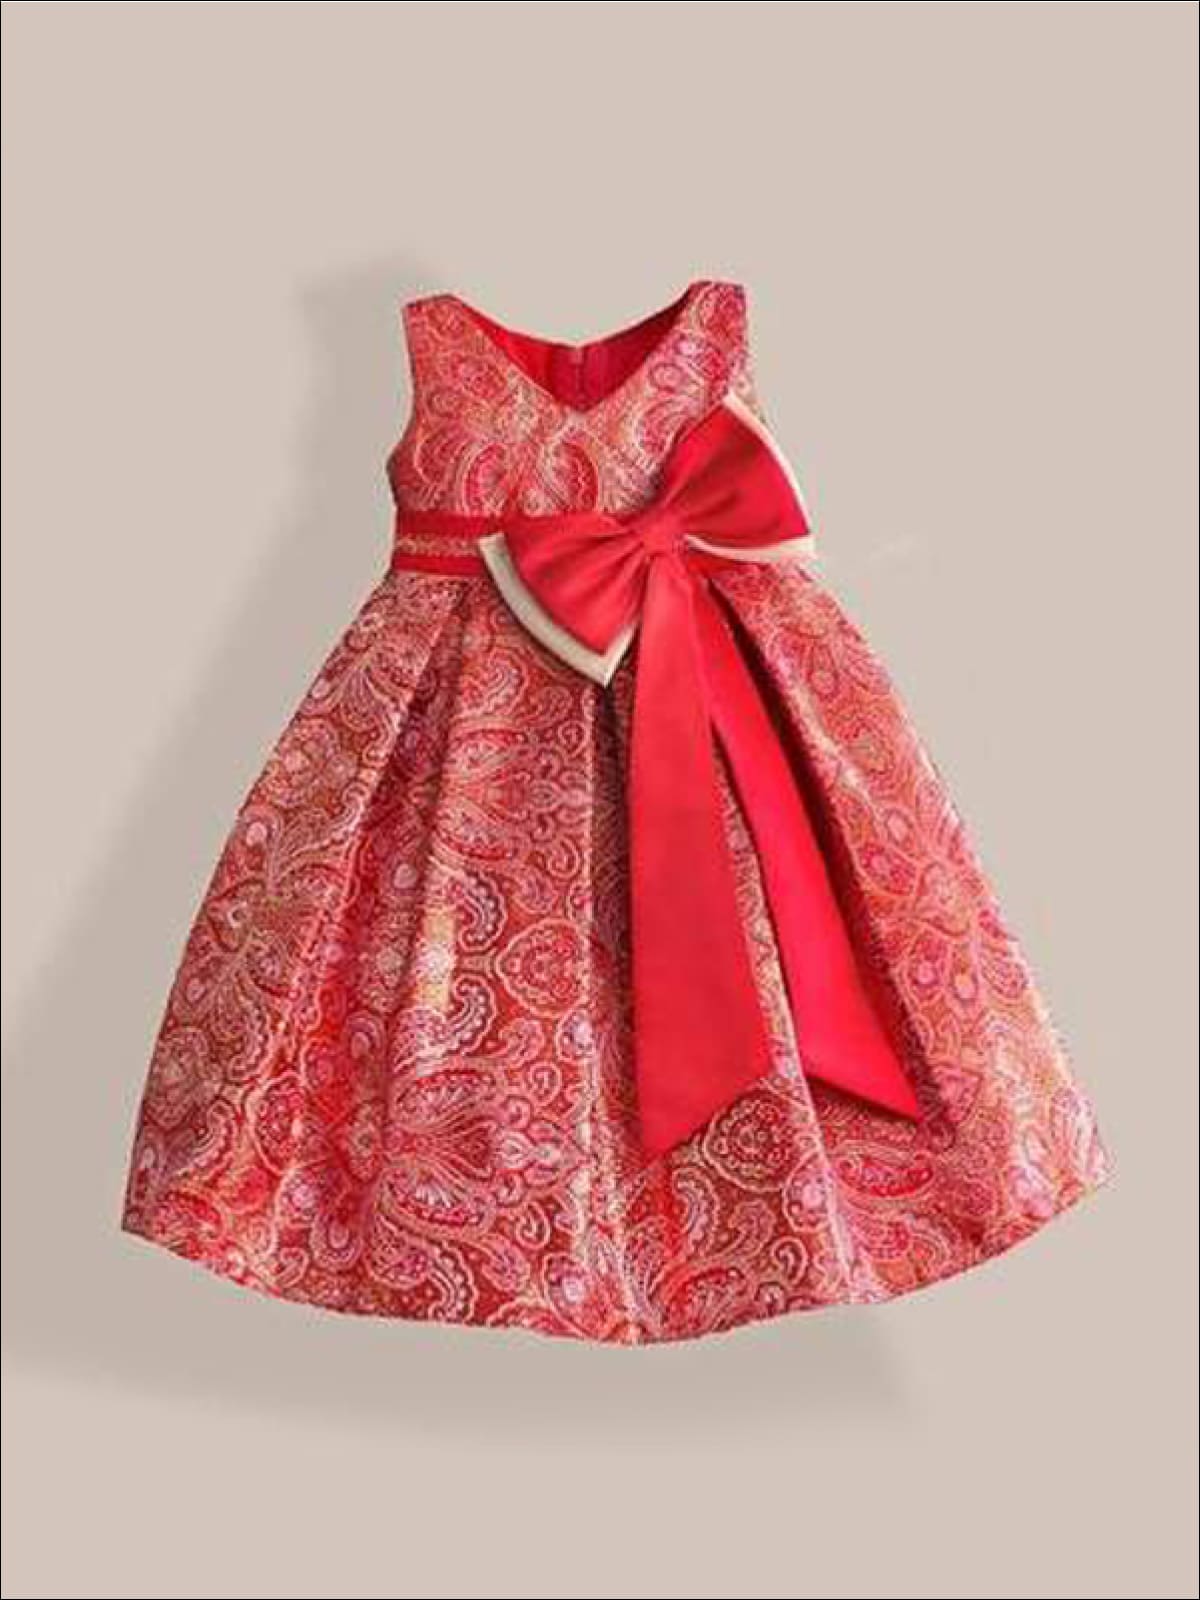 Girls Red & Gold Paisley Print Party Dress with Large Bow - Girls Dresses